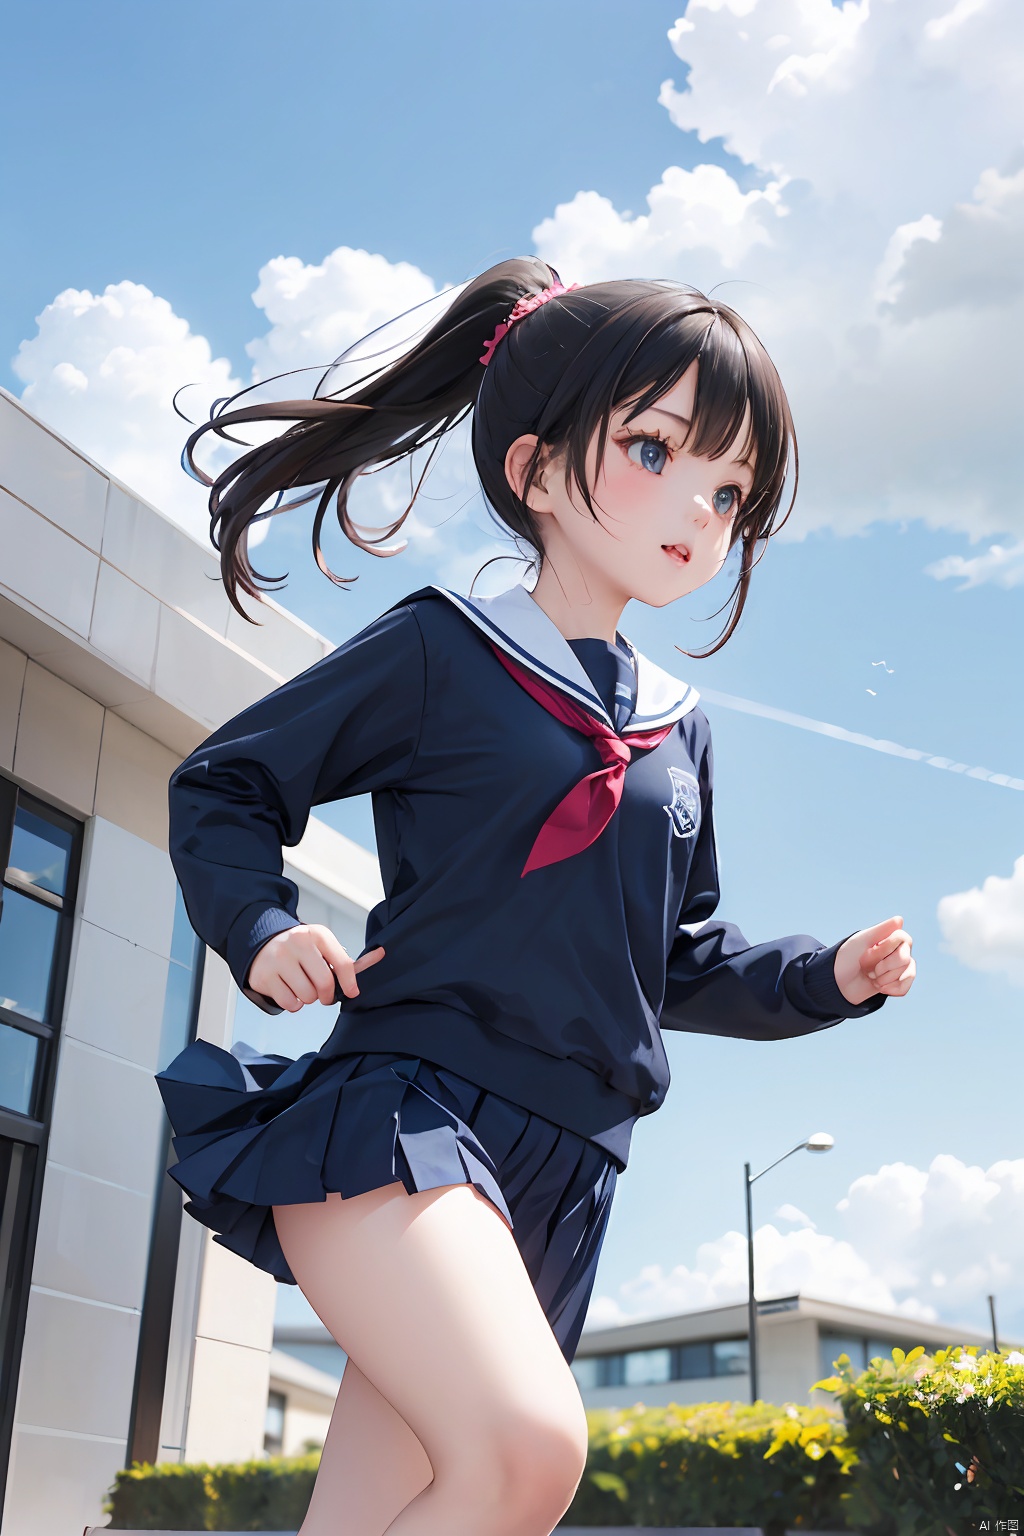 Loli, 1Girl, wearing school uniform, on campus, with a single ponytail, on the side, running happily in the campus, blue sky, rainbow, clouds,